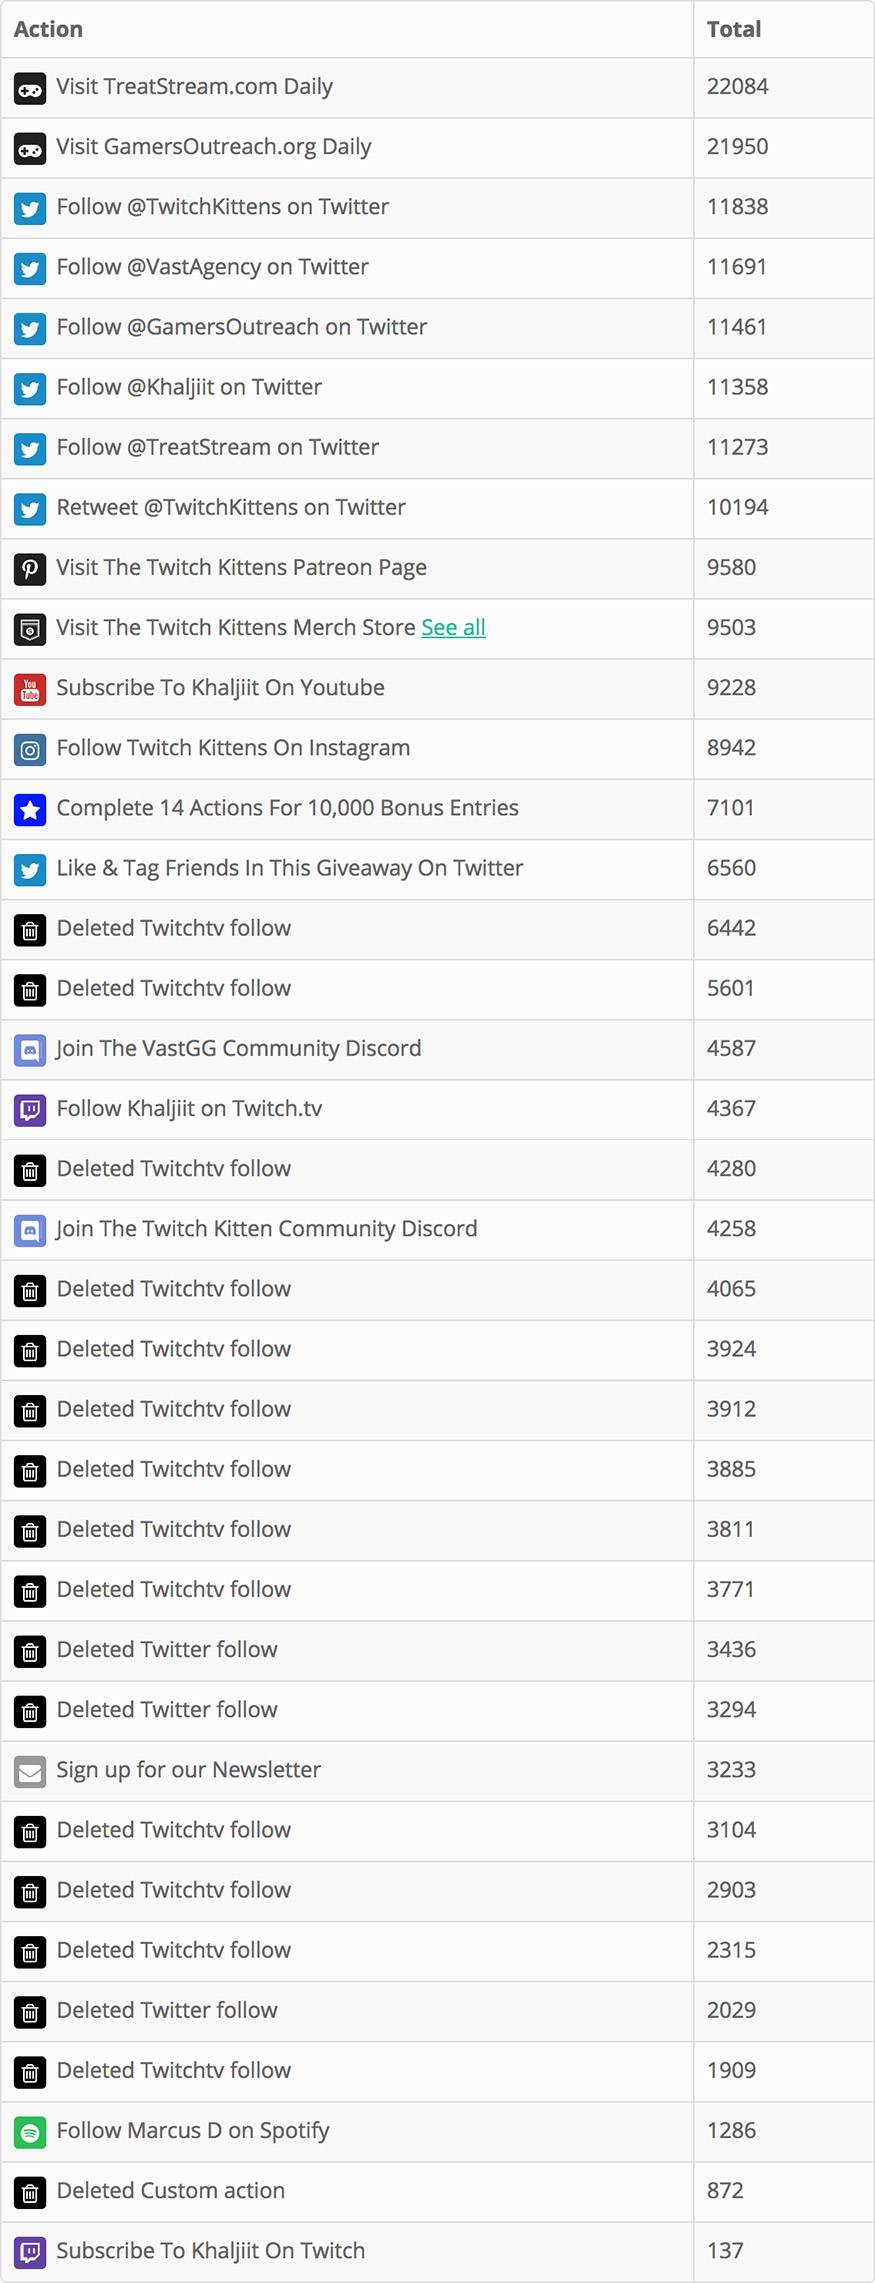 Twitch Kittens' Gleam Competitions campaign action reporting